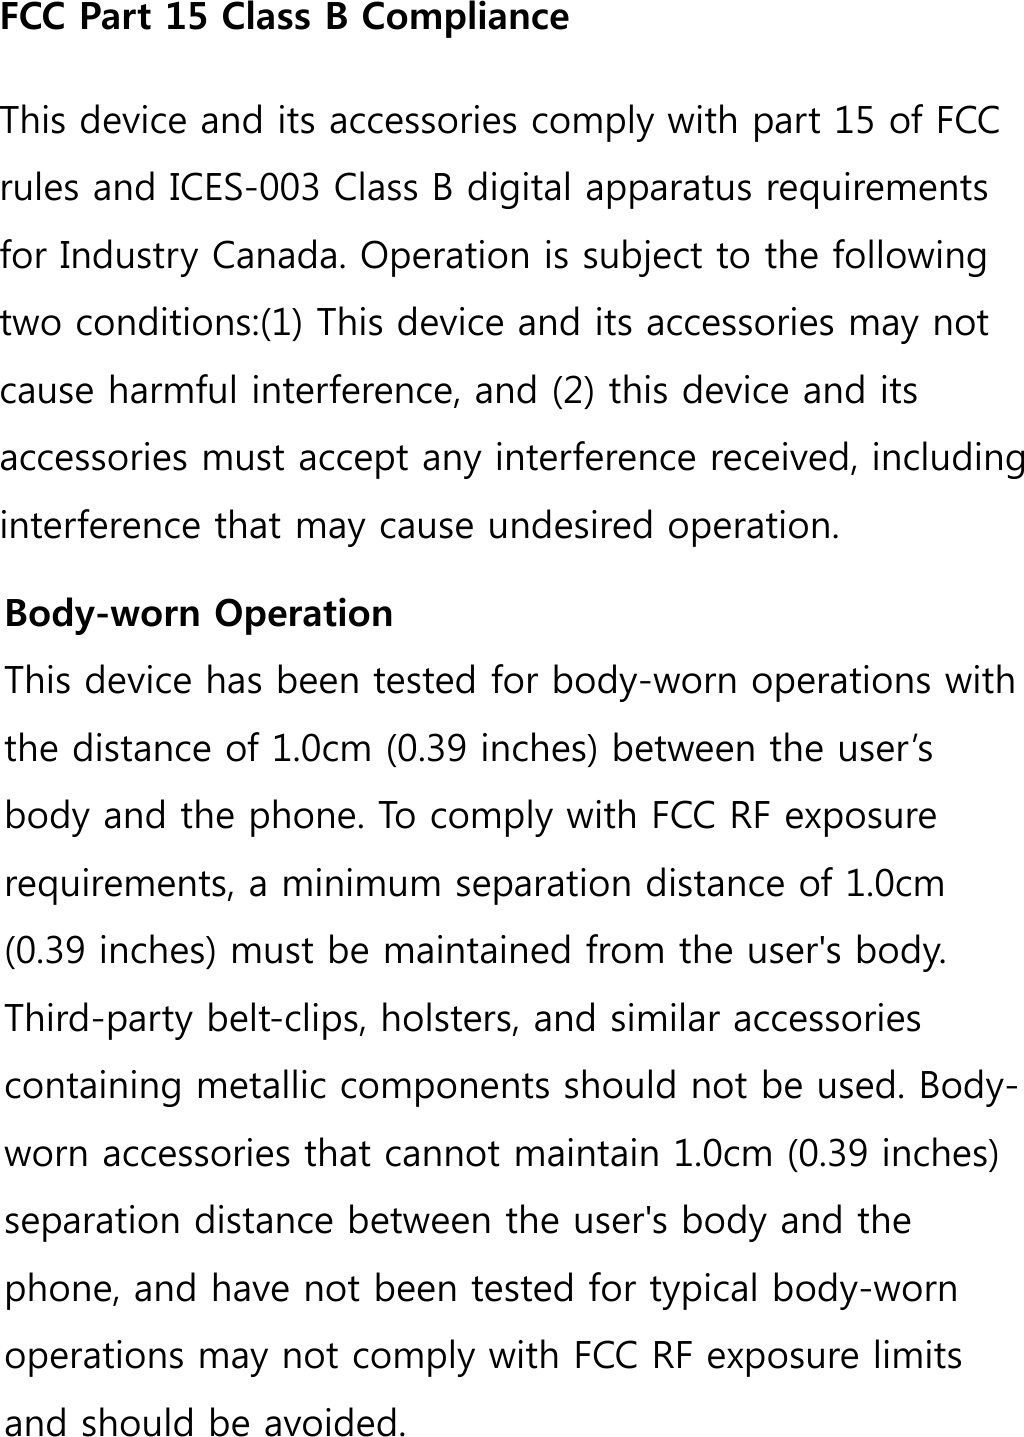 FCC Part 15 Class B ComplianceThis device and its accessories comply with part 15 of FCC rules and ICES-003 Class B digital apparatus requirements for Industry Canada. Operation is subject to the following two conditions:(1) This device and its accessories may not cause harmful interference, and (2) this device and its accessories must accept any interference received, including interference that may cause undesired operation.Body-worn OperationThis device has been tested for body-worn operations with the distance of 1.0cm (0.39 inches) between the user’s body and the phone. To comply with FCC RF exposure requirements, a minimum separation distance of 1.0cm (0.39 inches) must be maintained from the user&apos;s body. Third-party belt-clips, holsters, and similar accessories containing metallic components should not be used. Body-worn accessories that cannot maintain 1.0cm (0.39 inches) separation distance between the user&apos;s body and the phone, and have not been tested for typical body-worn operations may not comply with FCC RF exposure limits and should be avoided.